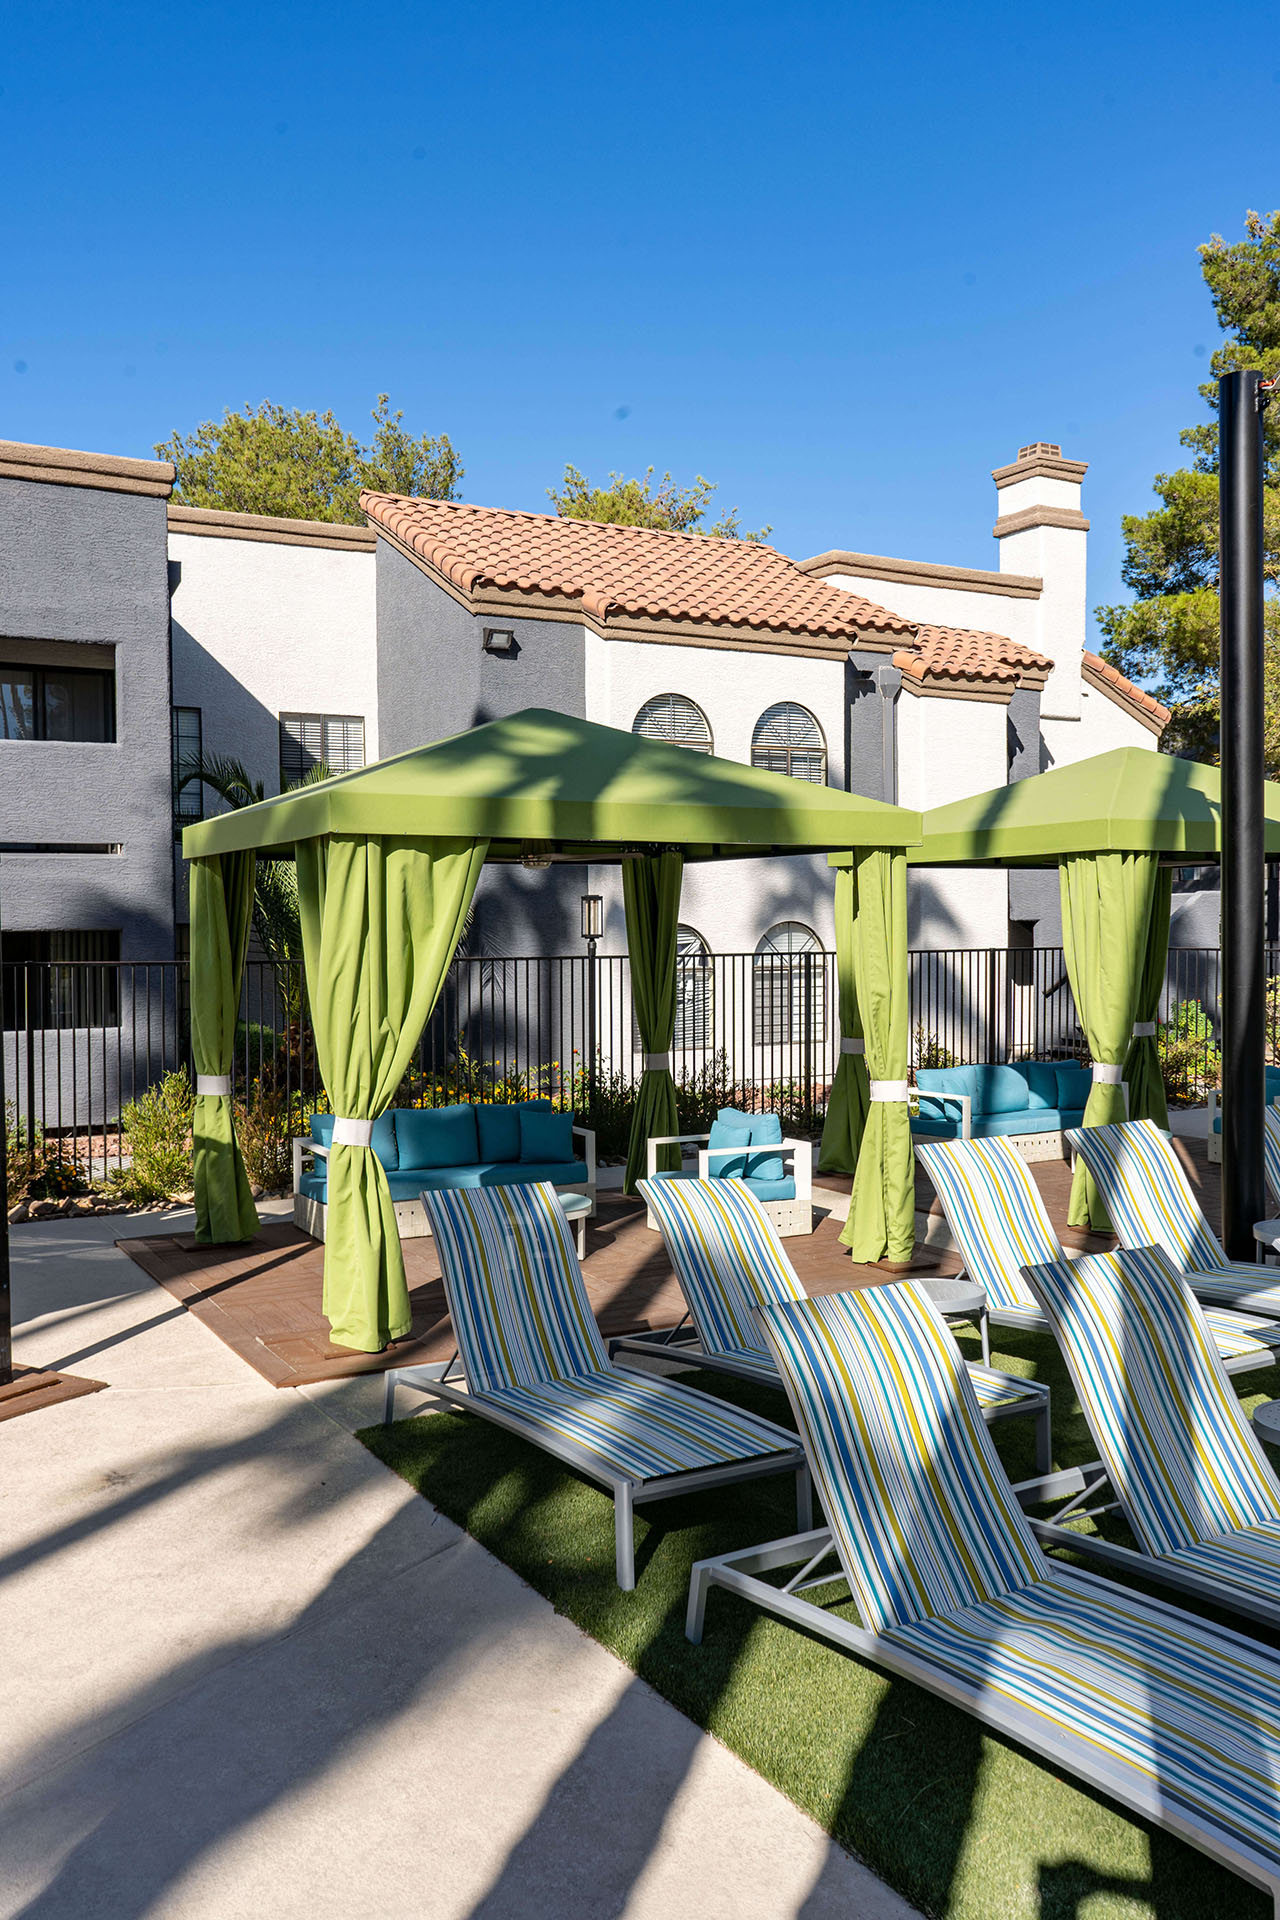 Beautiful Poolside Cabanas at the Martinique Bay Apartments located in Henderson, Nevada